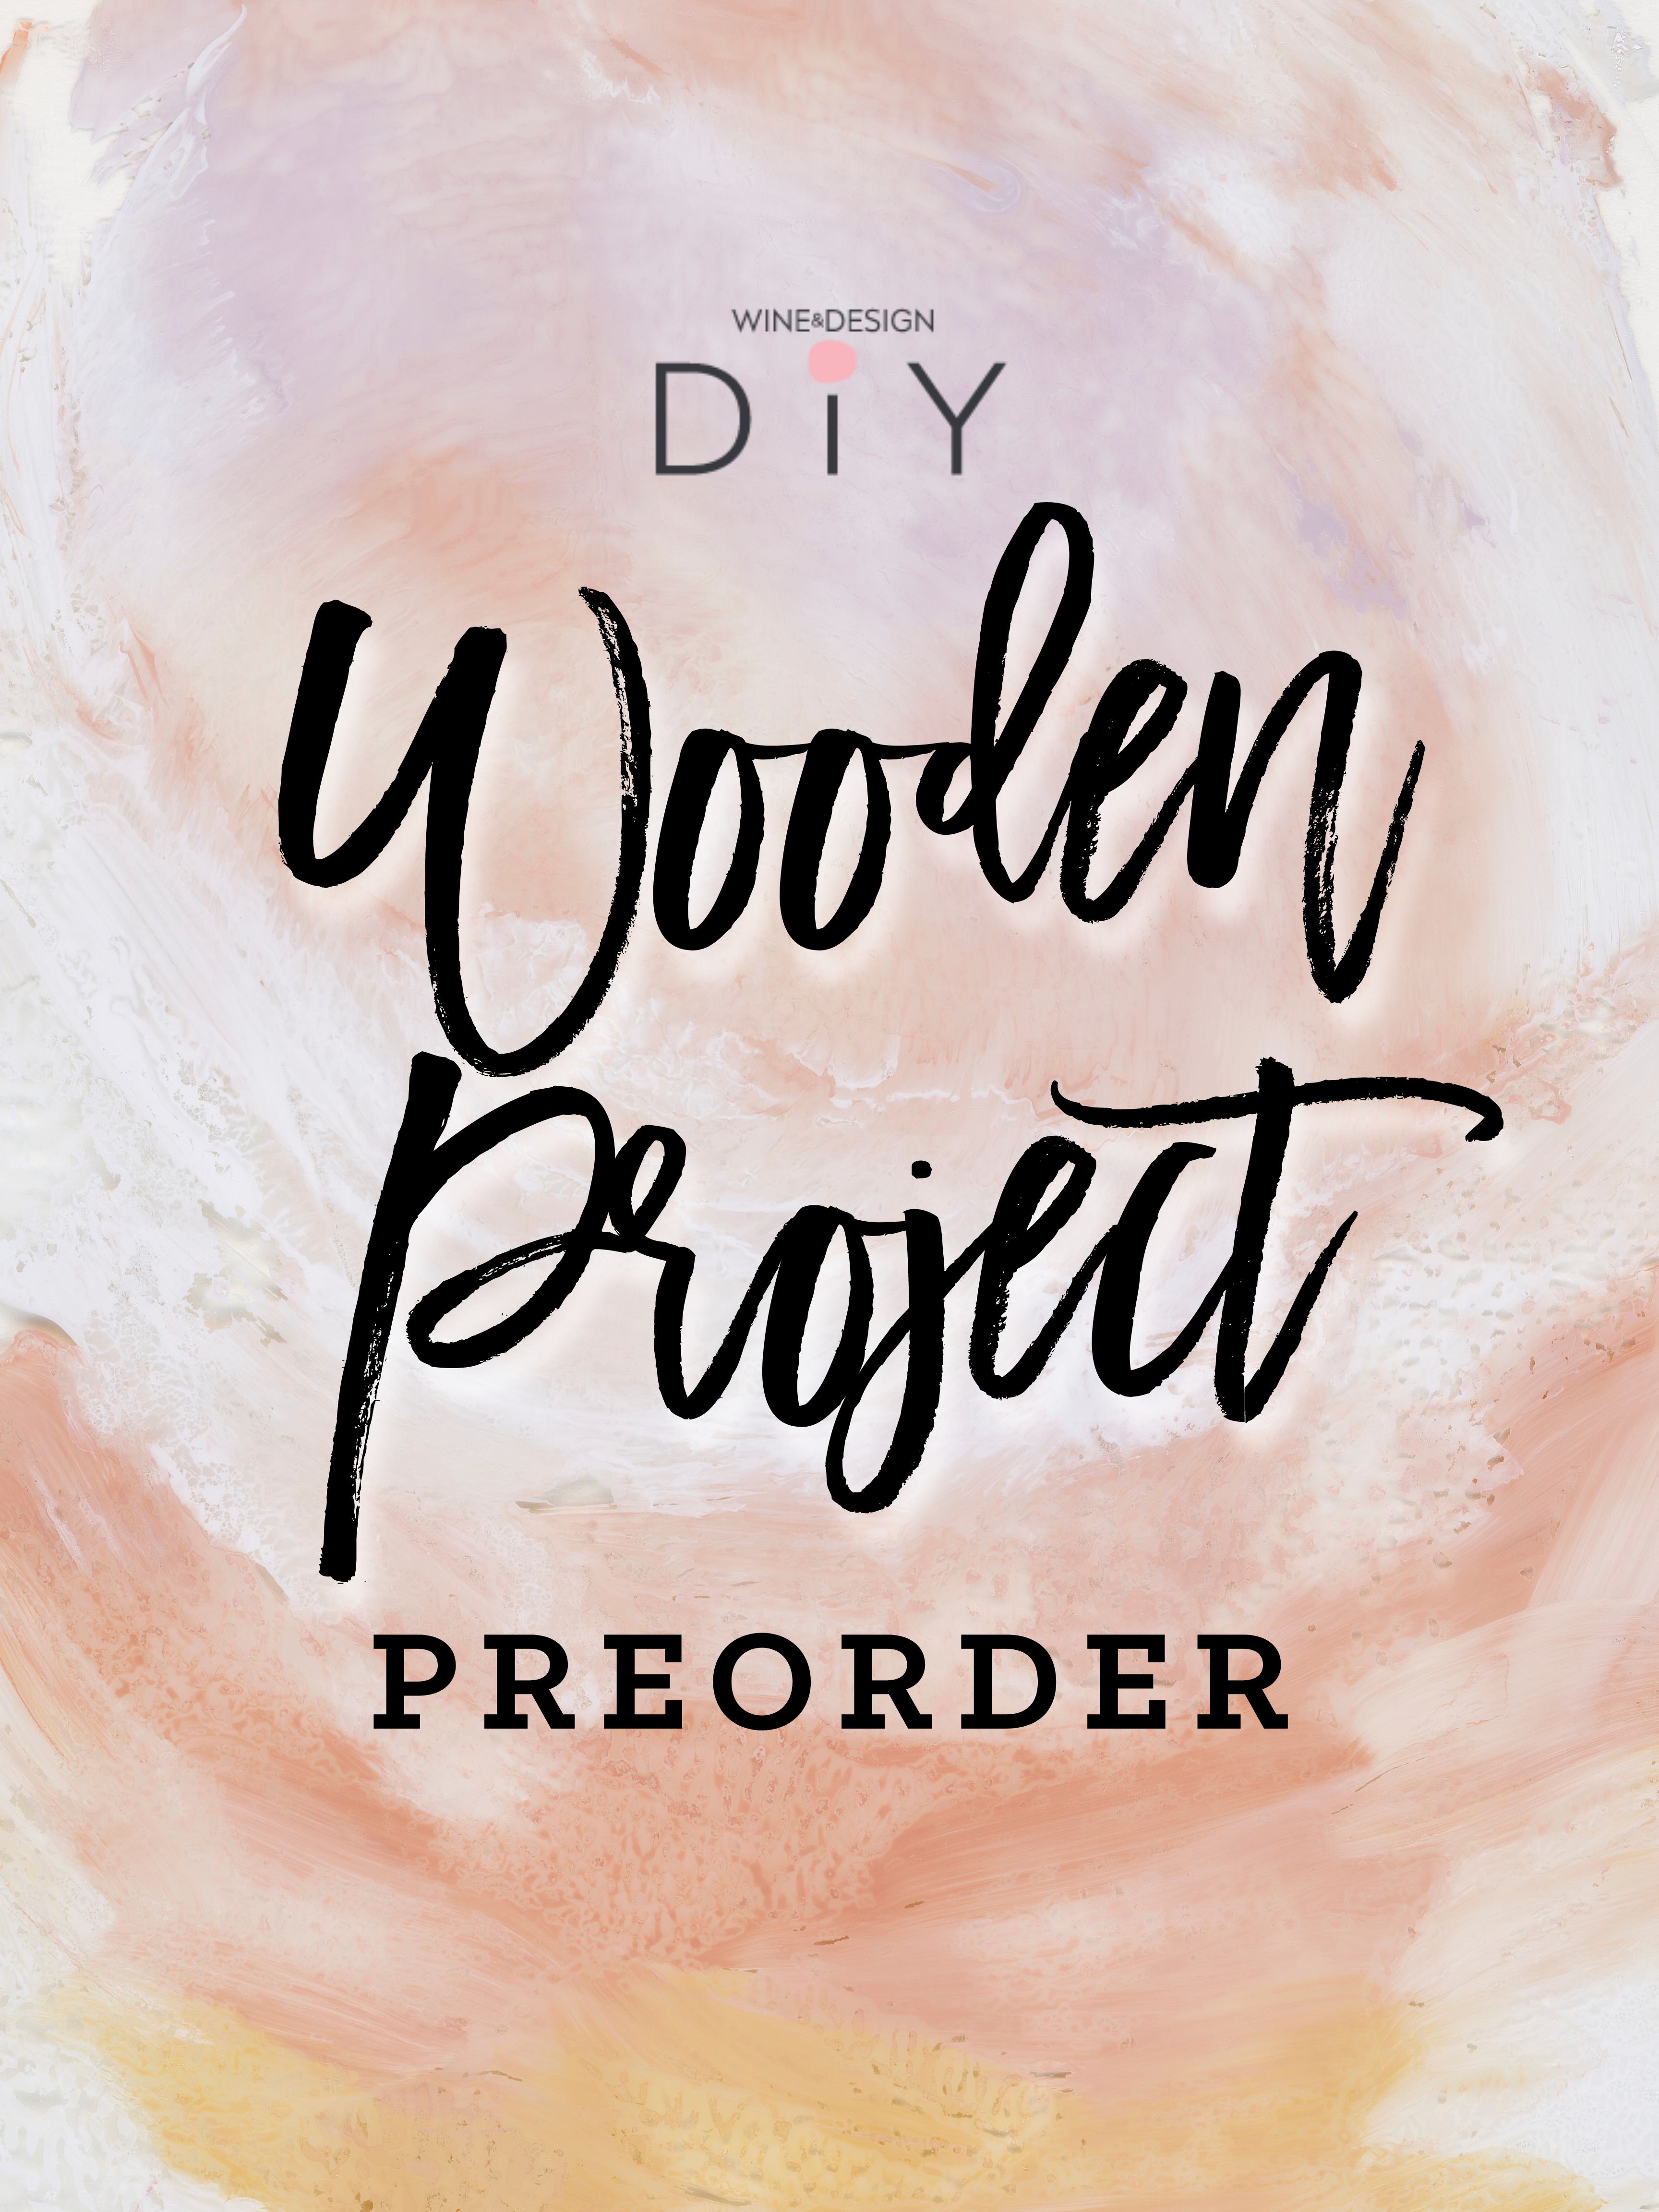 DIY Wood Project Take Home Kit Pre-Order